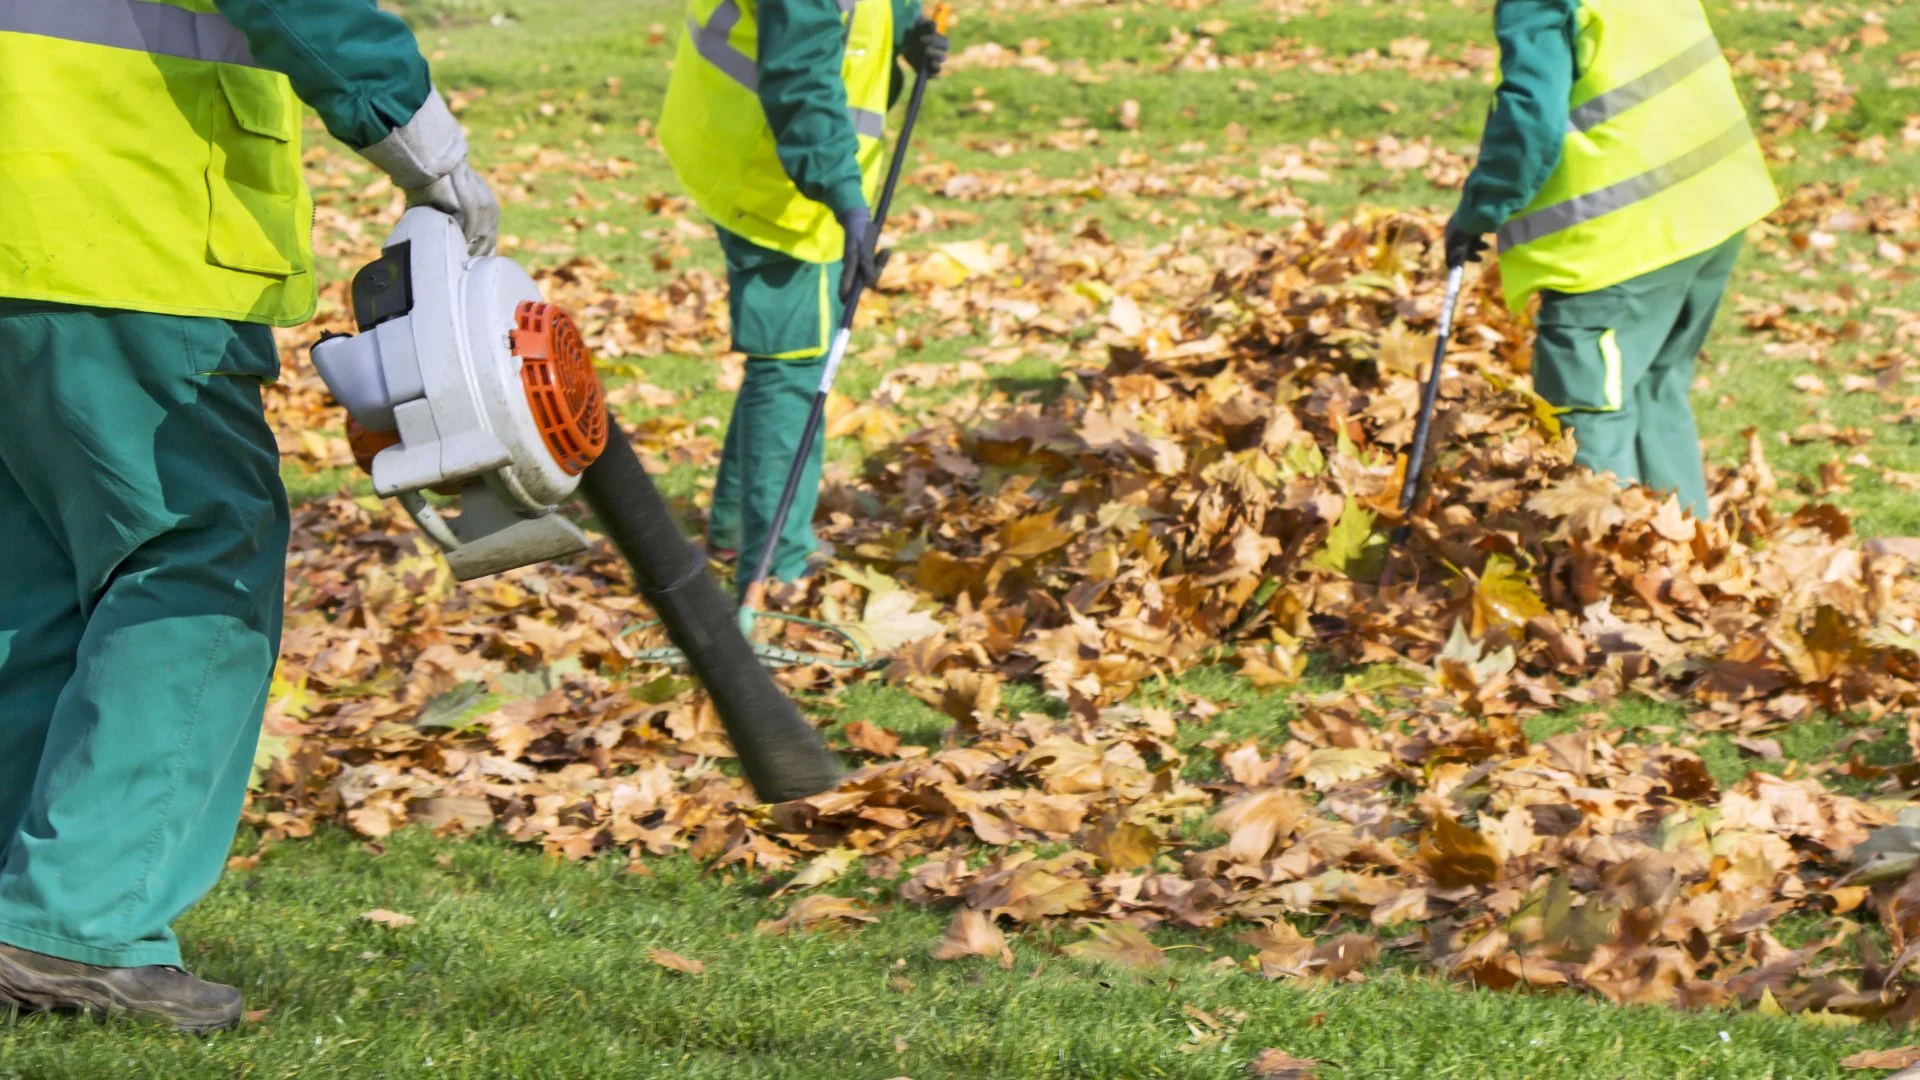 Keep Your Grass in Good Health - Remove the Leaf Piles on Your Lawn This Fall